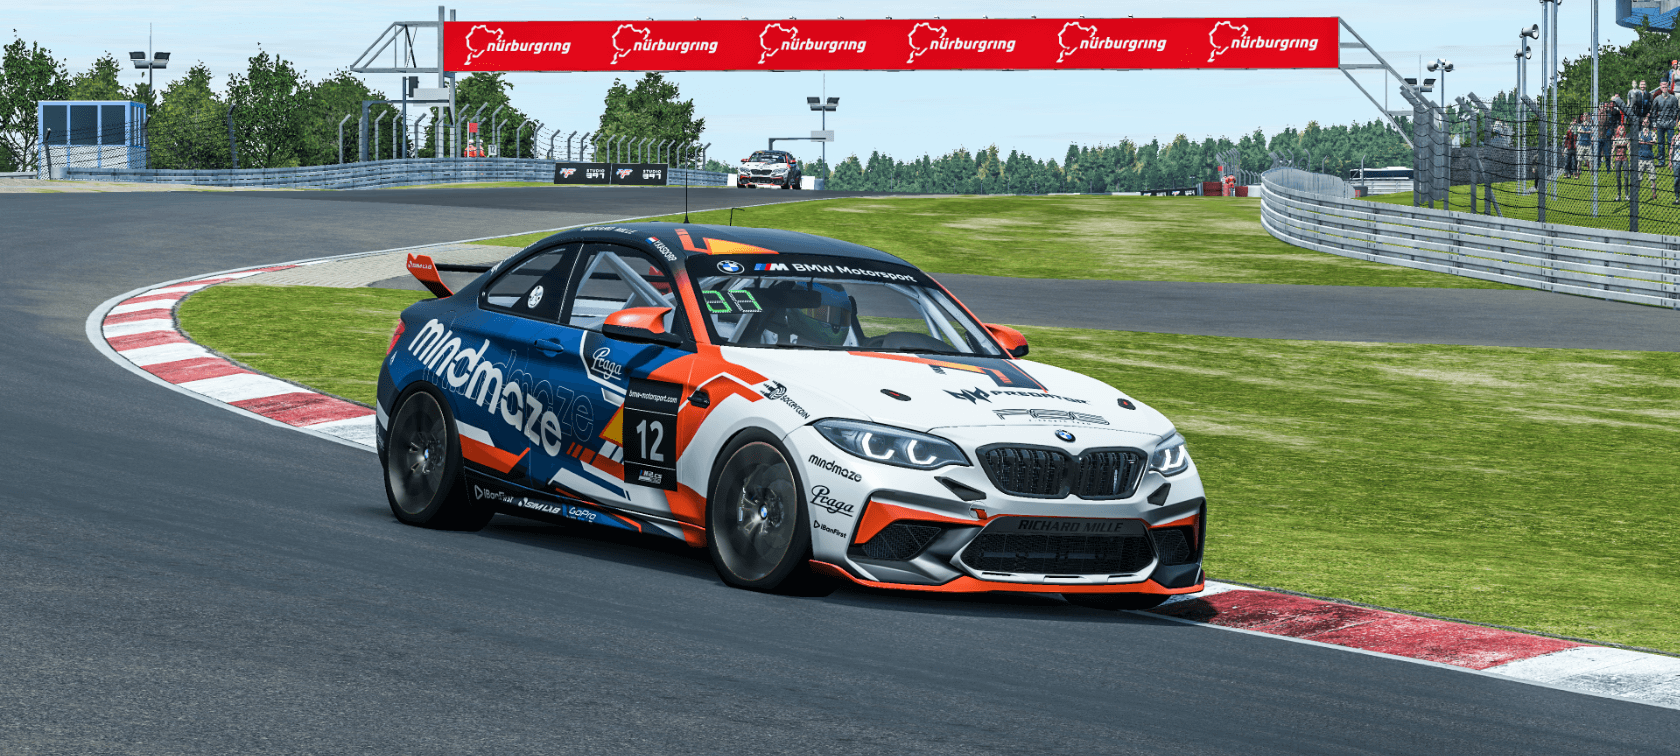 More information about "Progetto BMW Sim Racing: stasera alle 20 l'rFactor 2 BMW Reveal Event"